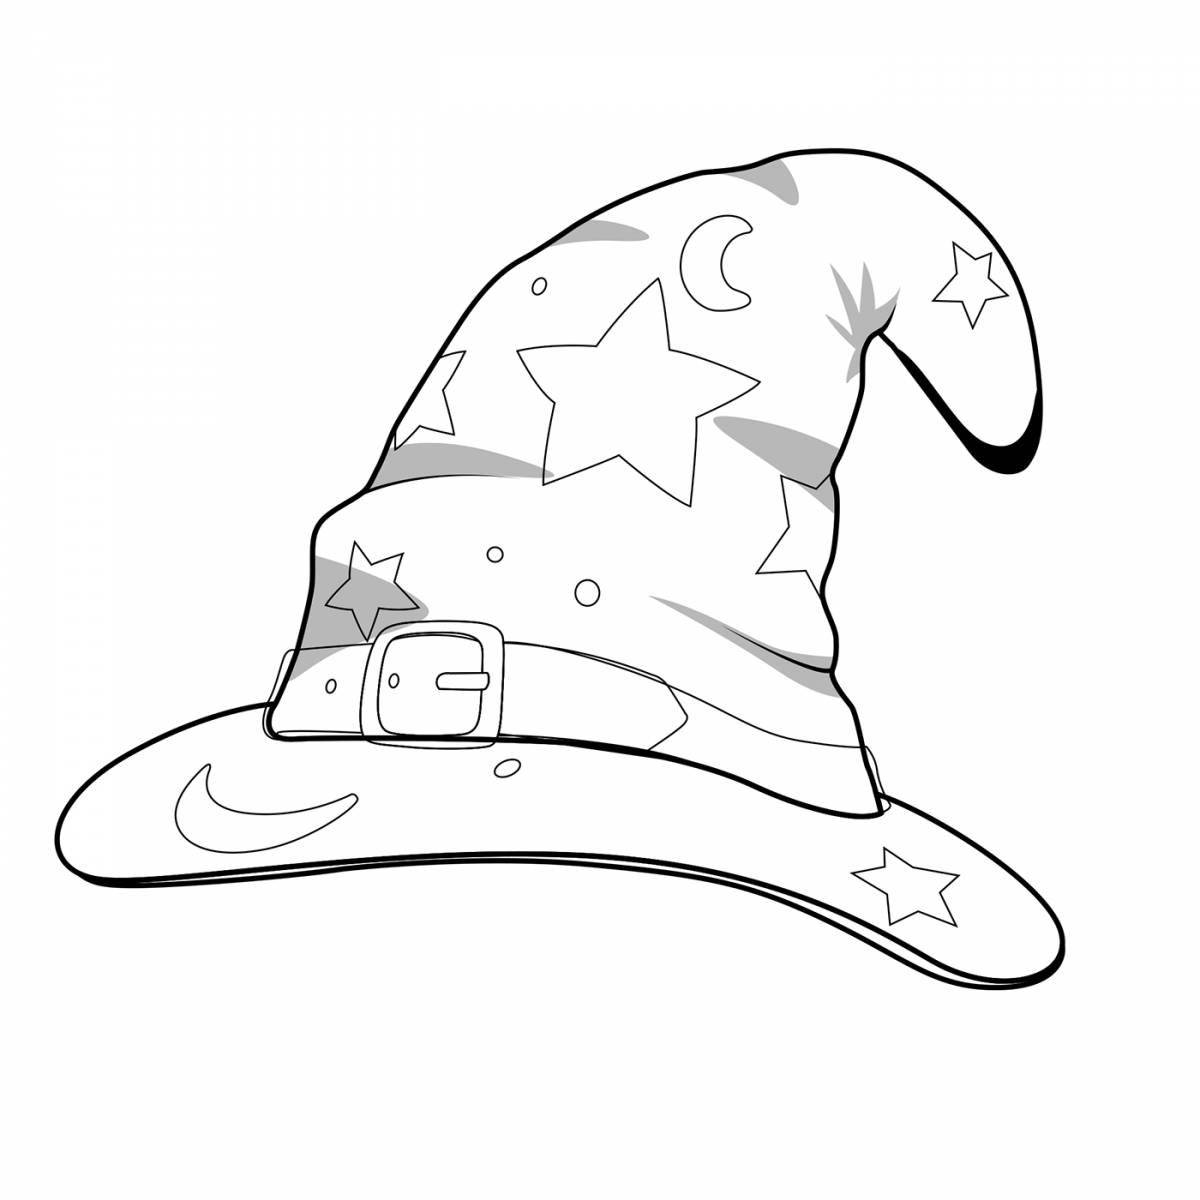 Fine wizard hat coloring page